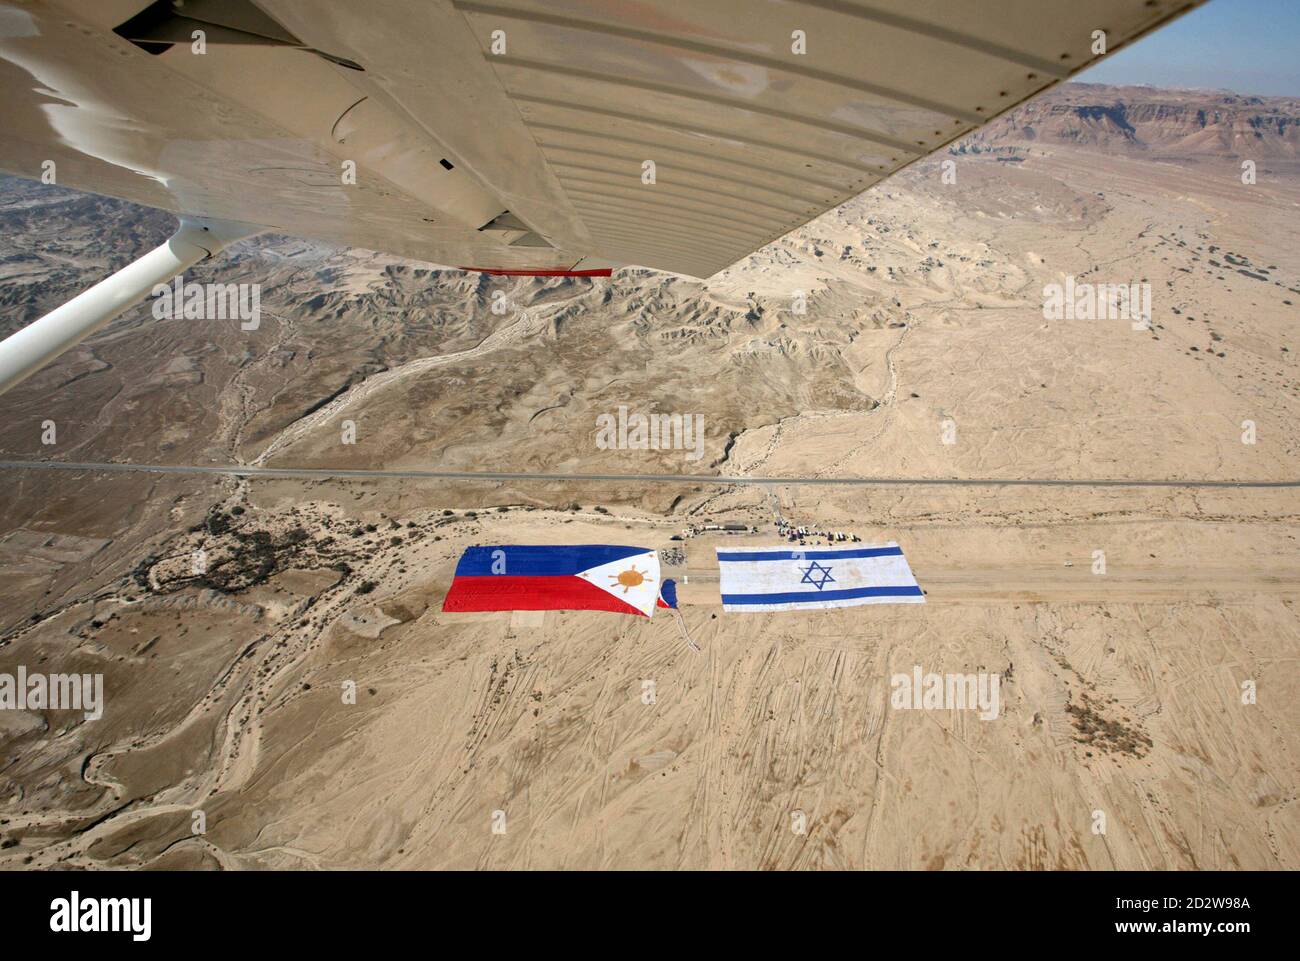 Israel S National Flag Is Displayed Beside The Philippine Flag On The Shore Of The Dead Sea November 25 2007 The Two Flags Both 100 Meters Long 328 Feet And 200 Meters Wide 656